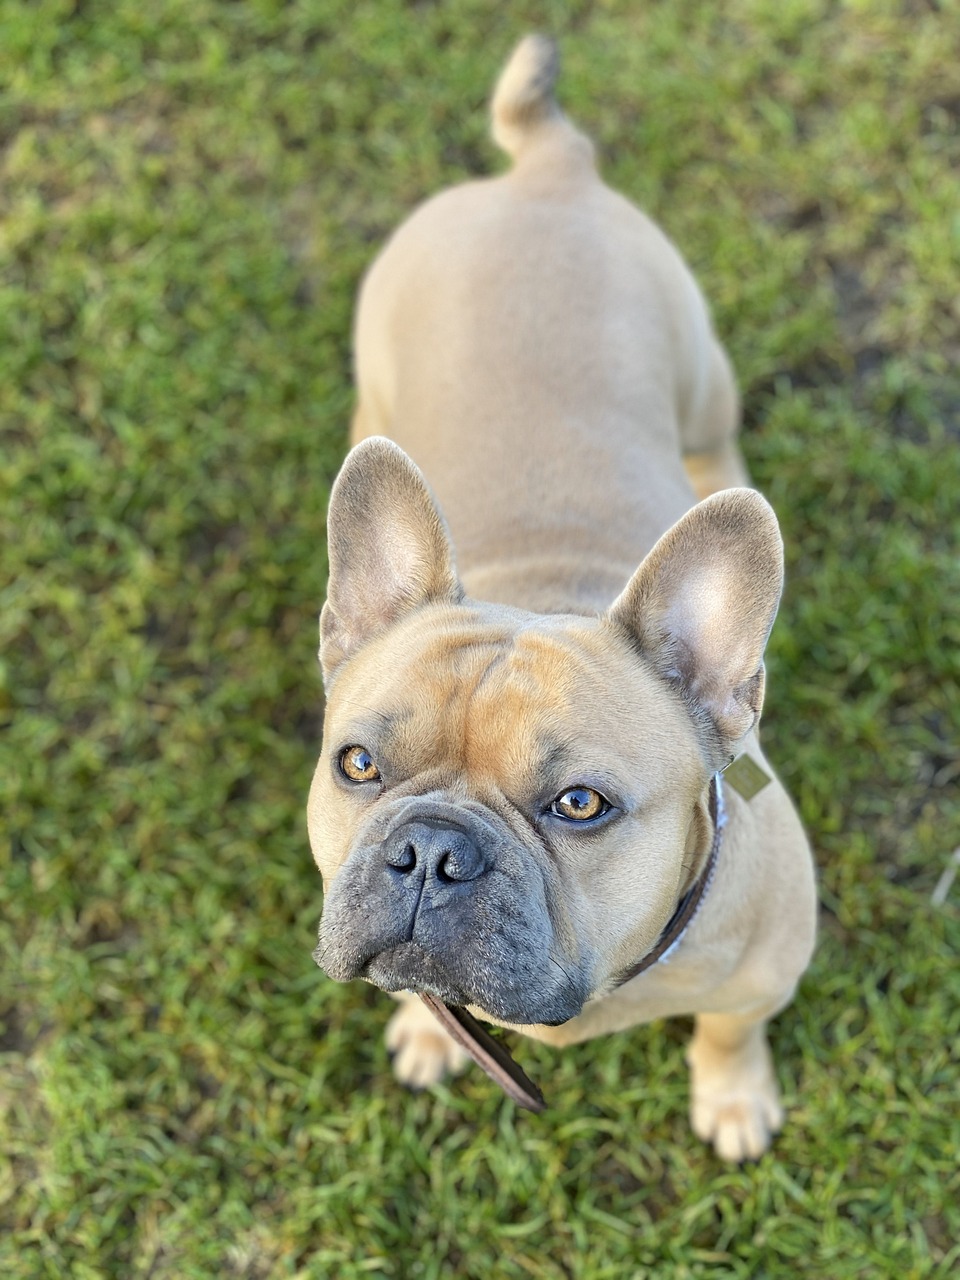 a small dog standing on top of a lush green field, renaissance, french bulldog, high angle close up shot, portrait mode photo, alert brown eyes